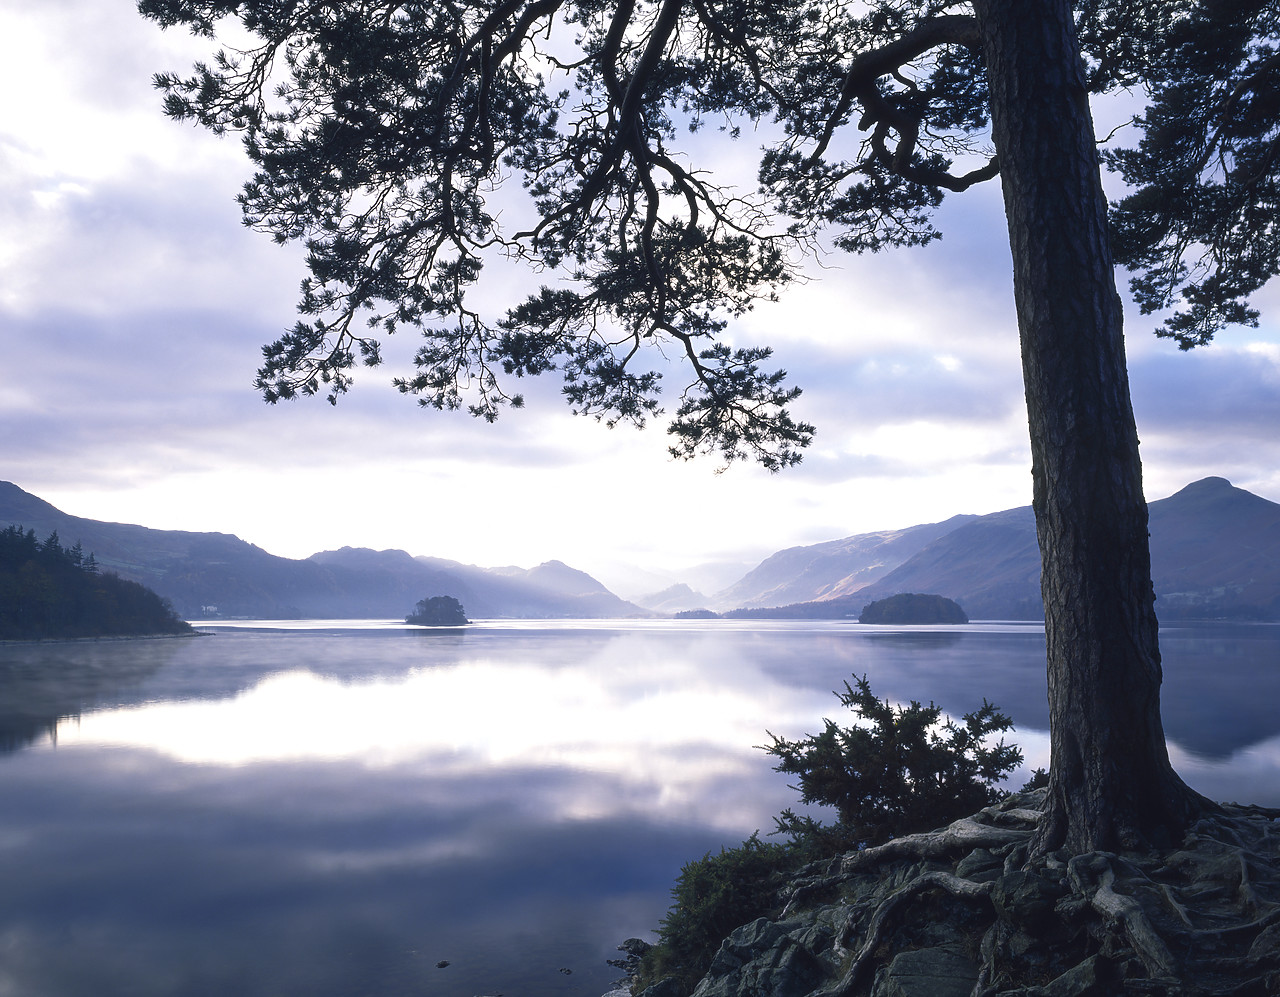 #892562-1 - Derwent Water from Friar's Crag, Lake District National Park, Cumbria, England